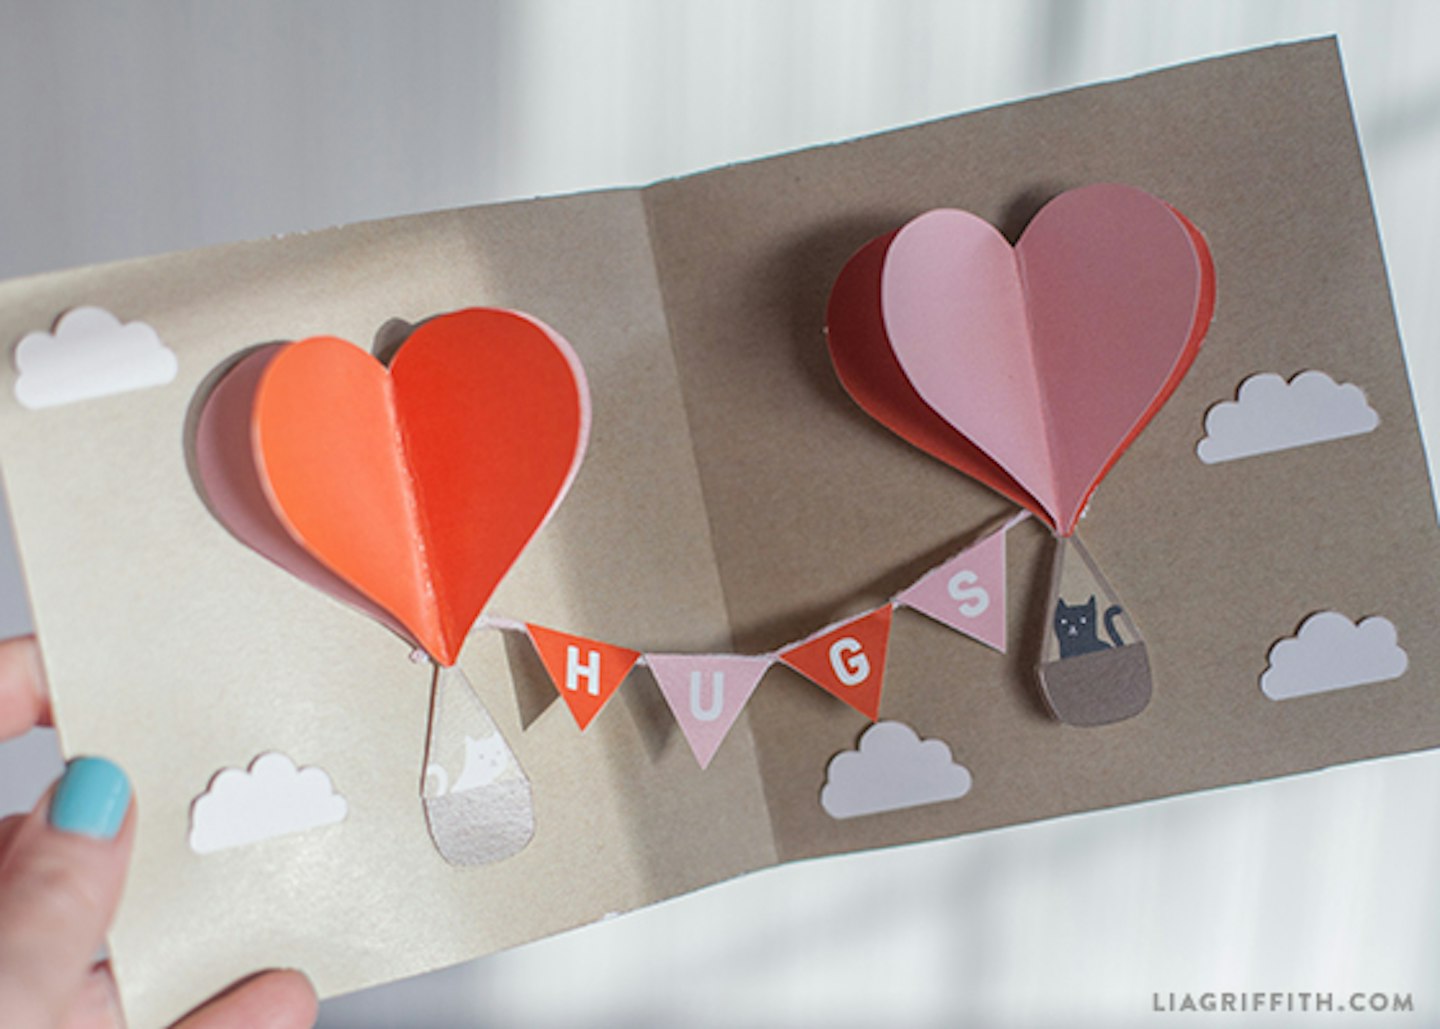 10 DIY Valentine's cards for your loved one